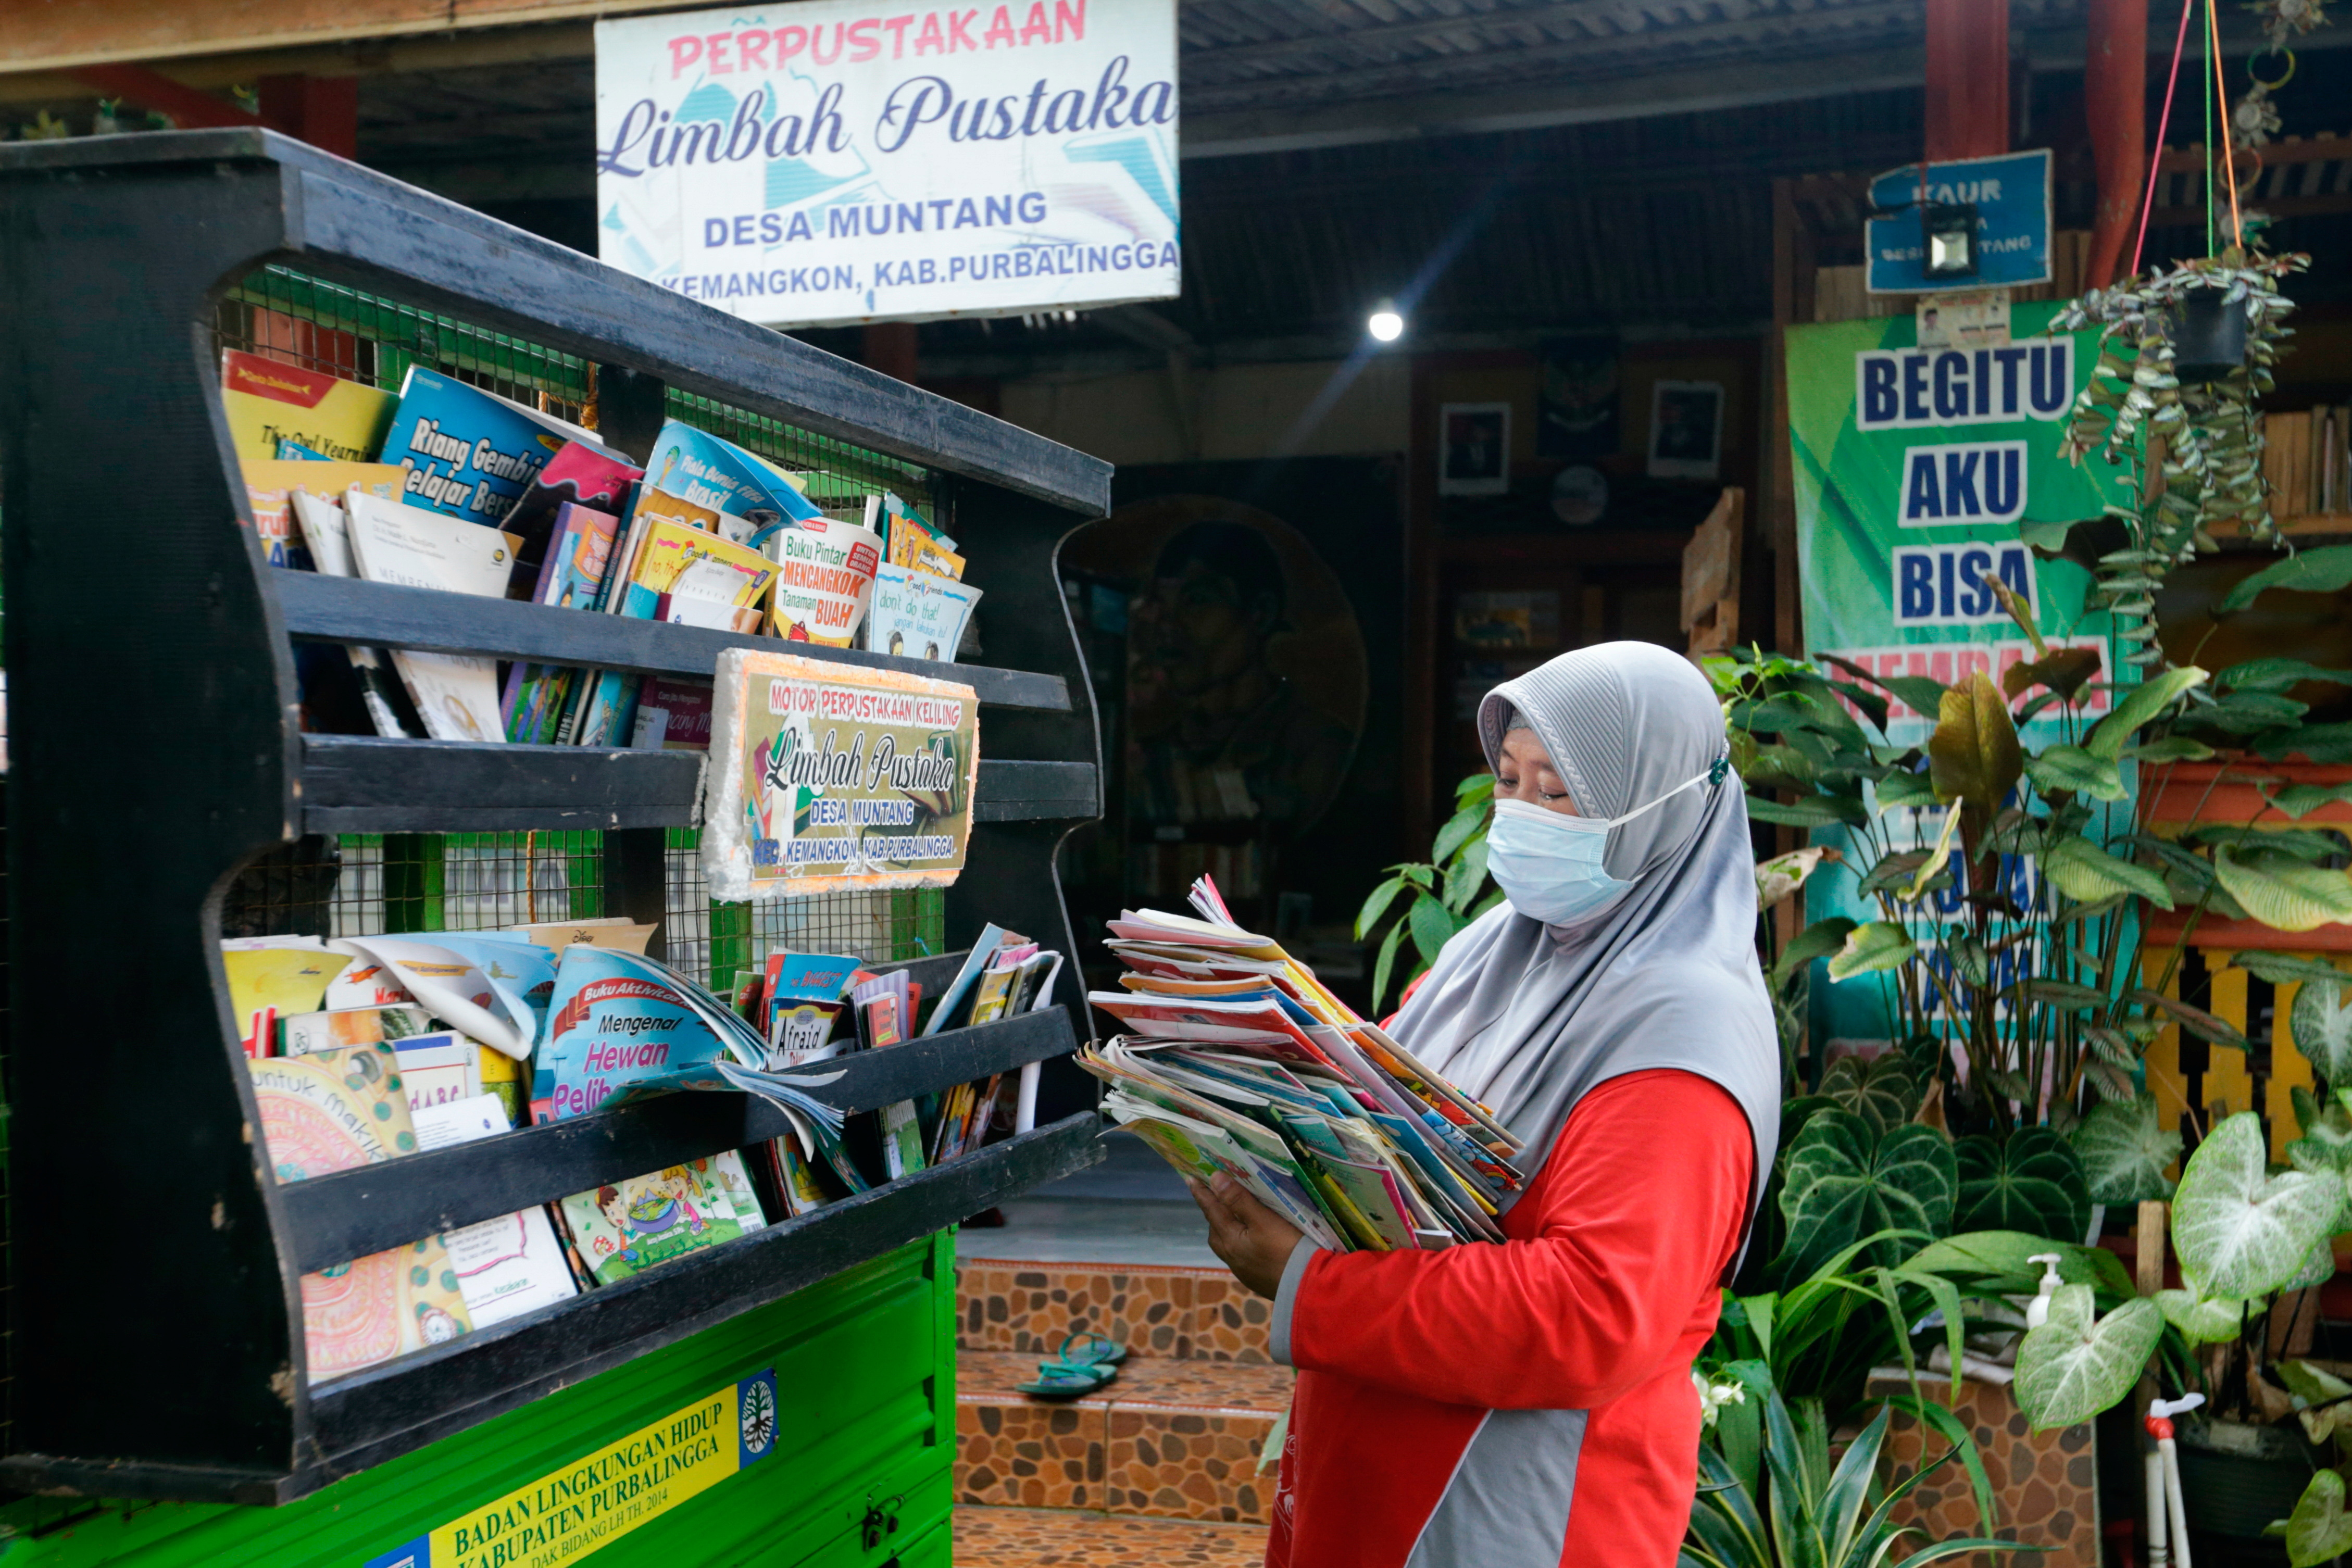 Founder of the waste library (Limbah Pustaka), Raden Roro Hendarti, 48, arranges books on a three-wheeler vehicle at the library in Muntang village, Purbalingga, Central Java province, Indonesia November 2, 2021. REUTERS/Ajeng Dinar Ulfiana